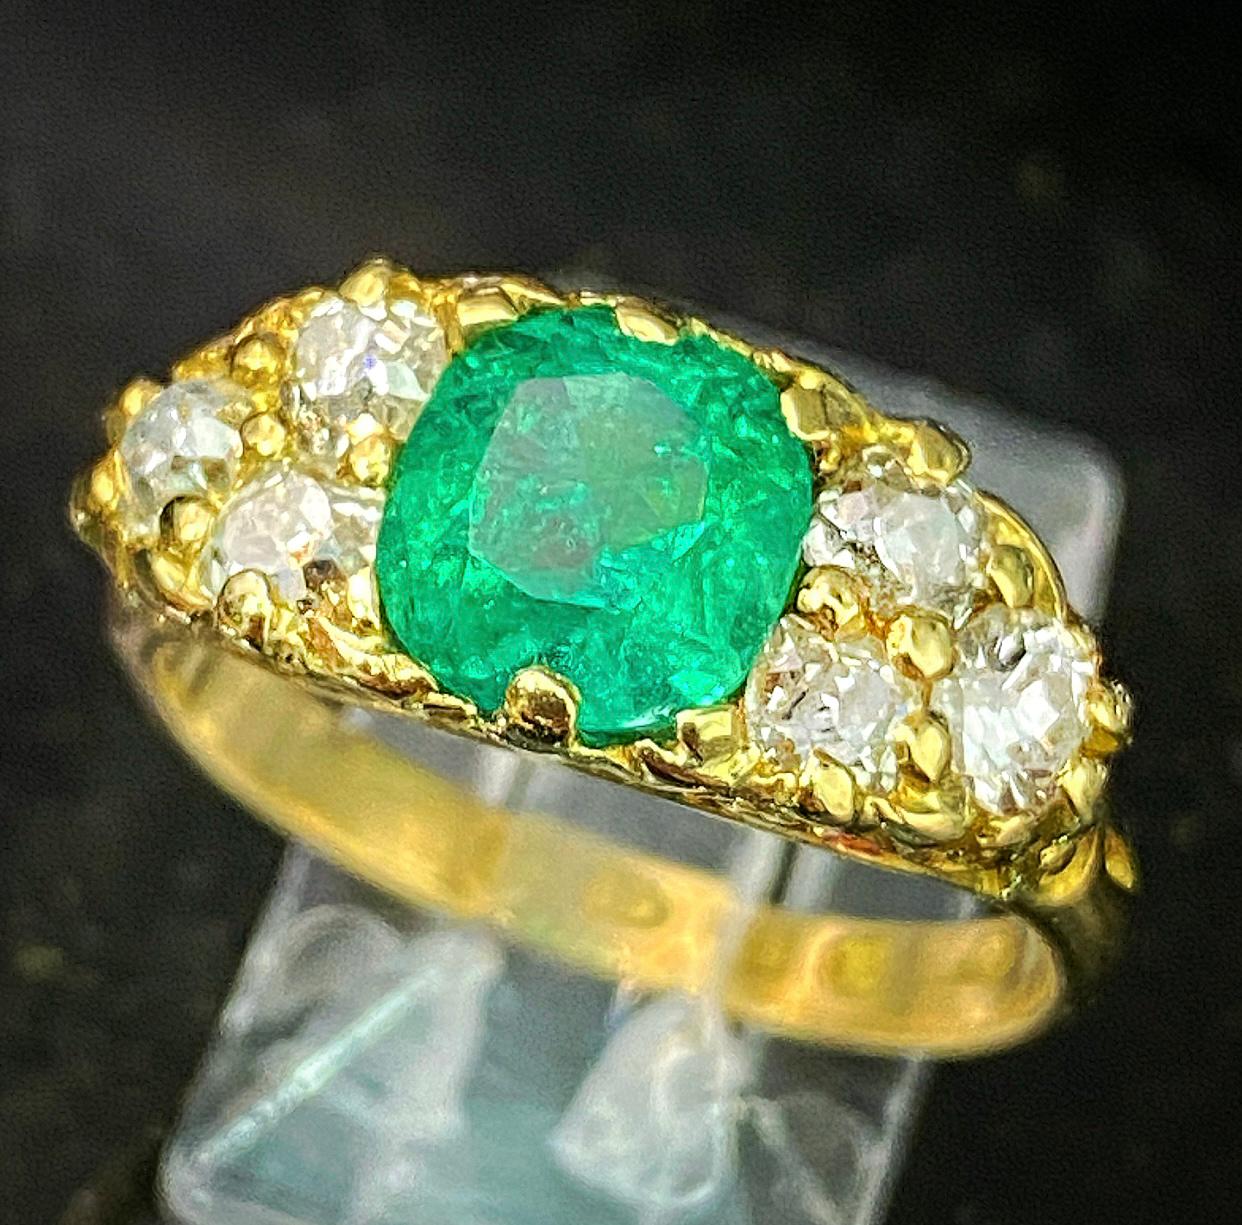 Women's or Men's Victorian 1.14ct Emerald and Diamond Ring, c.1880s For Sale